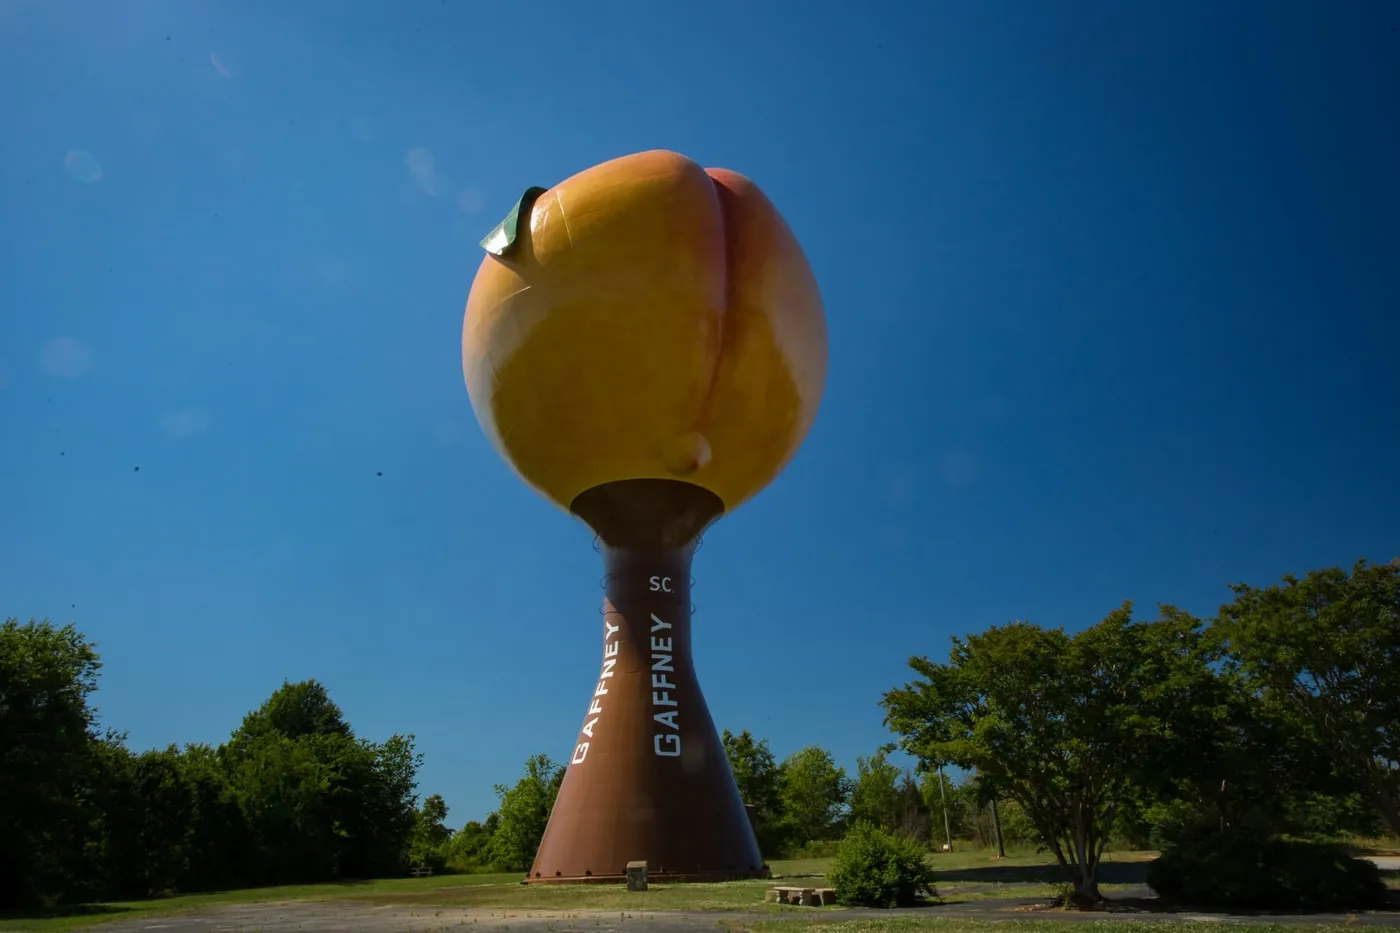 The best South Carolina roadside attractions to visit on a South Carolina road trip. Add these roadside oddities to your travel bucket list or itinerary!